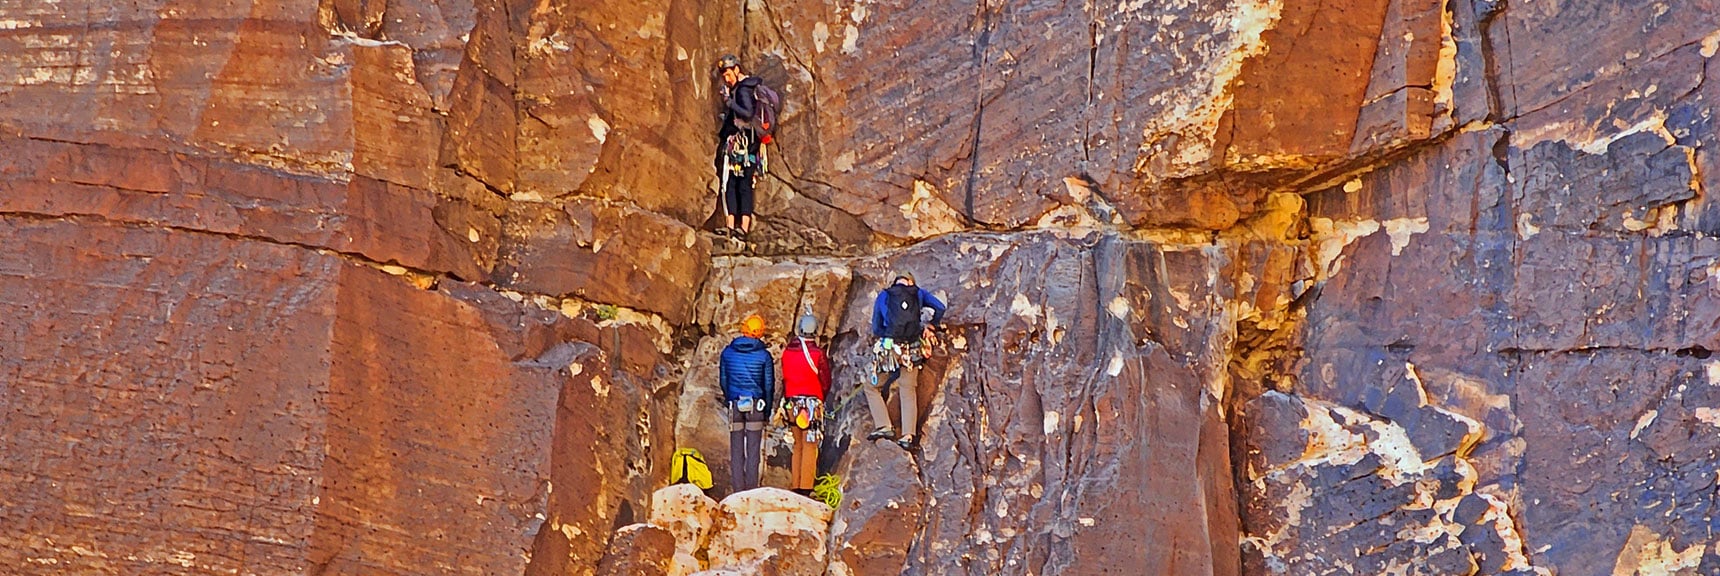 Quite a Gathering on the Ledge Below. | Rock Climber Observations | Pine Creek Canyon | Rainbow Mountain Wilderness, Nevada